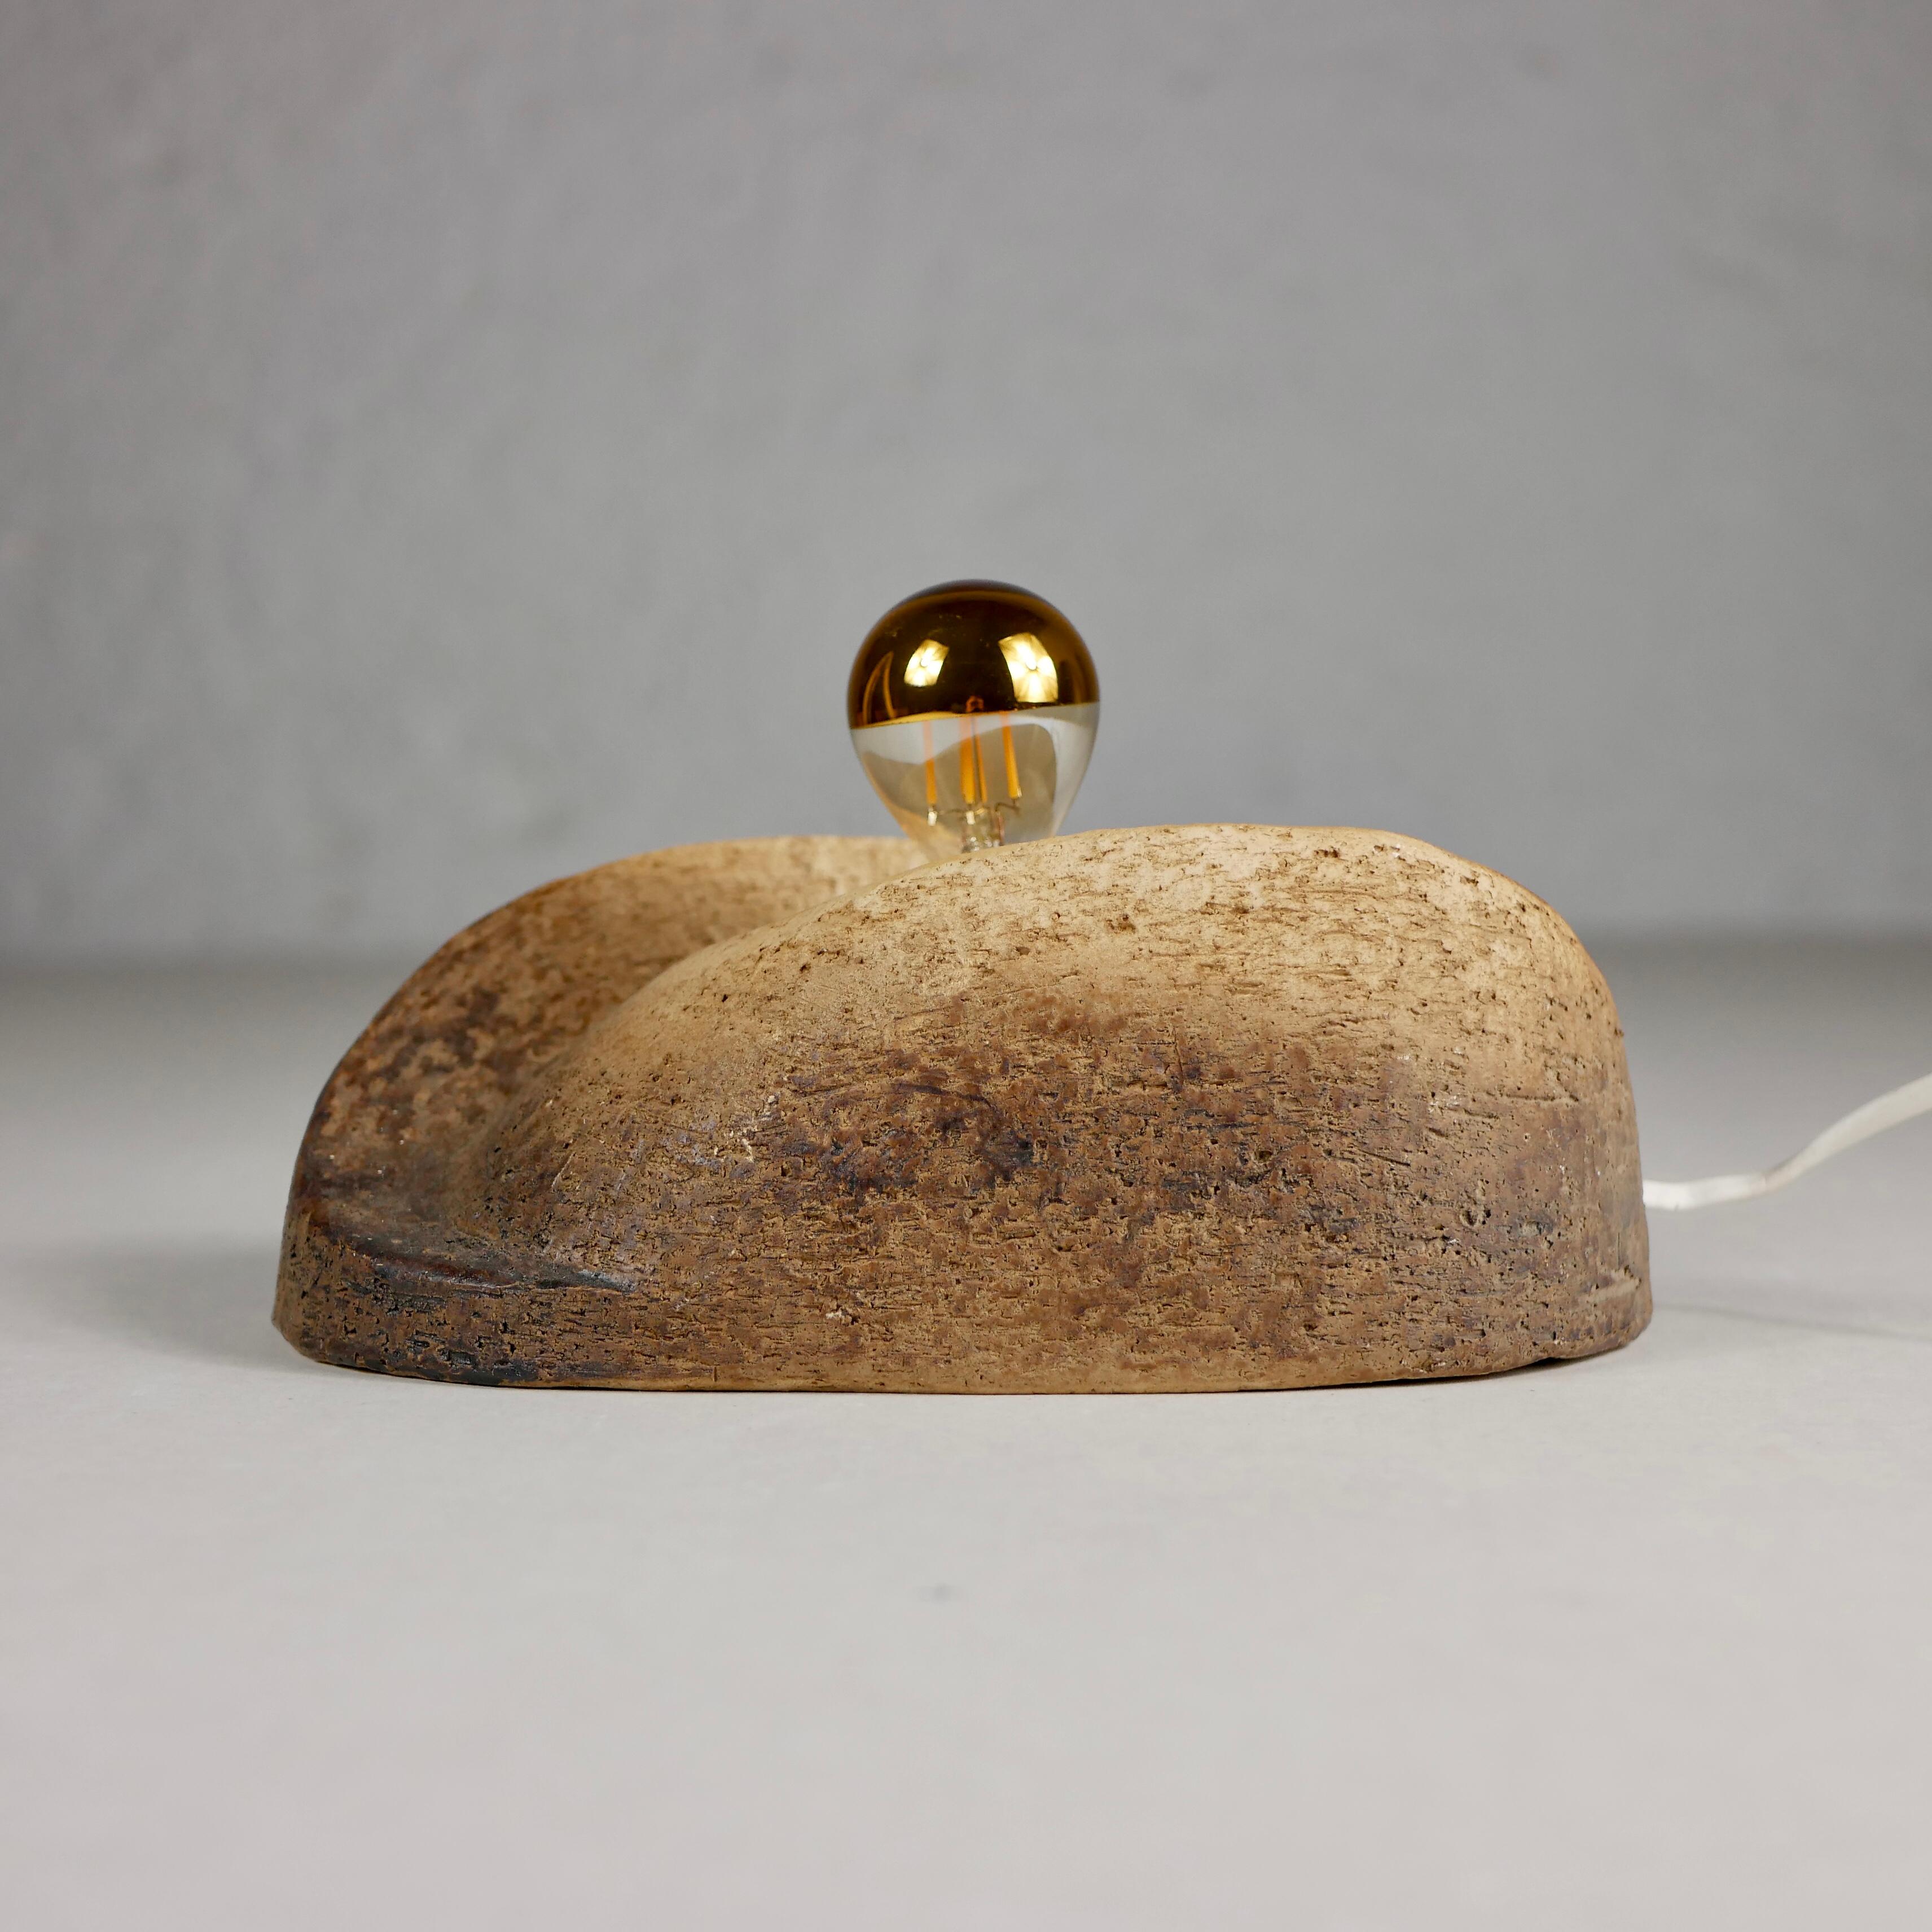 Dutch Pebble Shape Table or Wall Lamp in Ceramic, 1970s For Sale 6